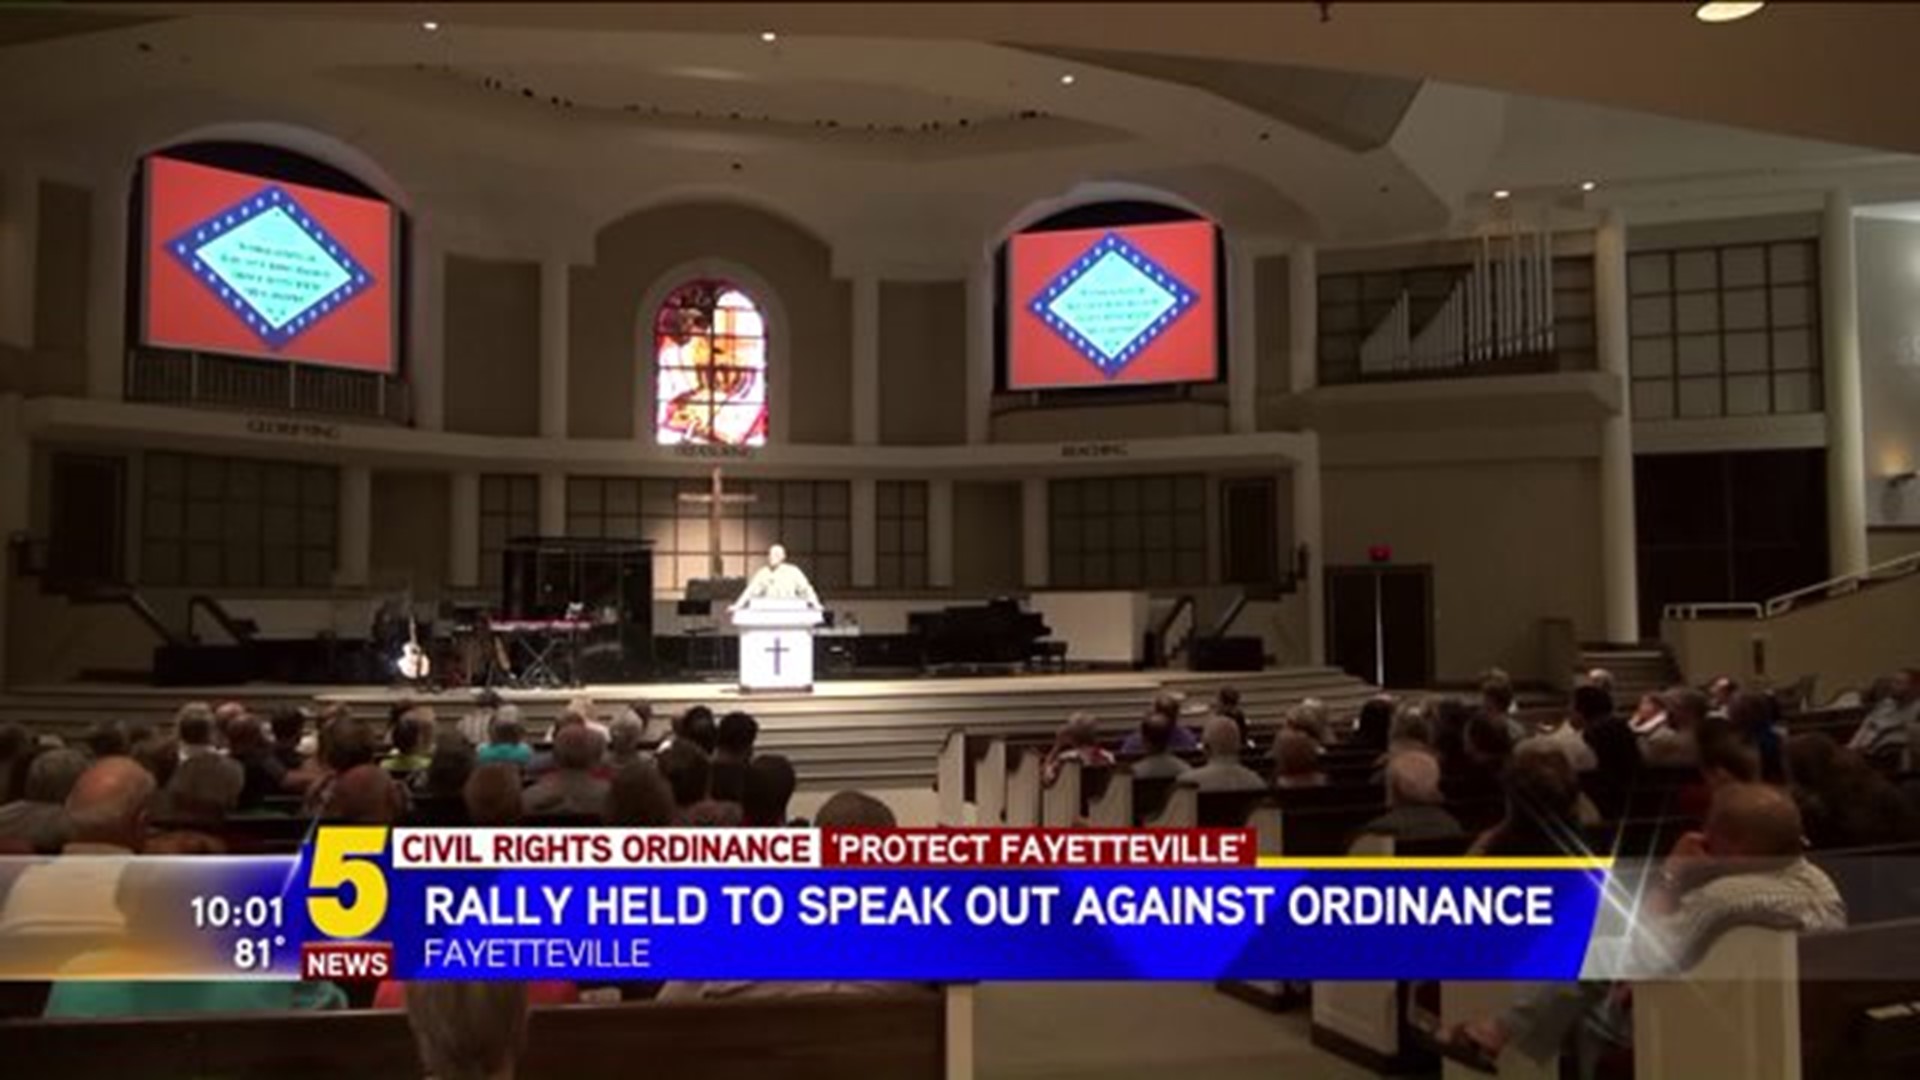 "Protect Fayetteville" Holds Rally To Oppose Civil Rights Ordinance